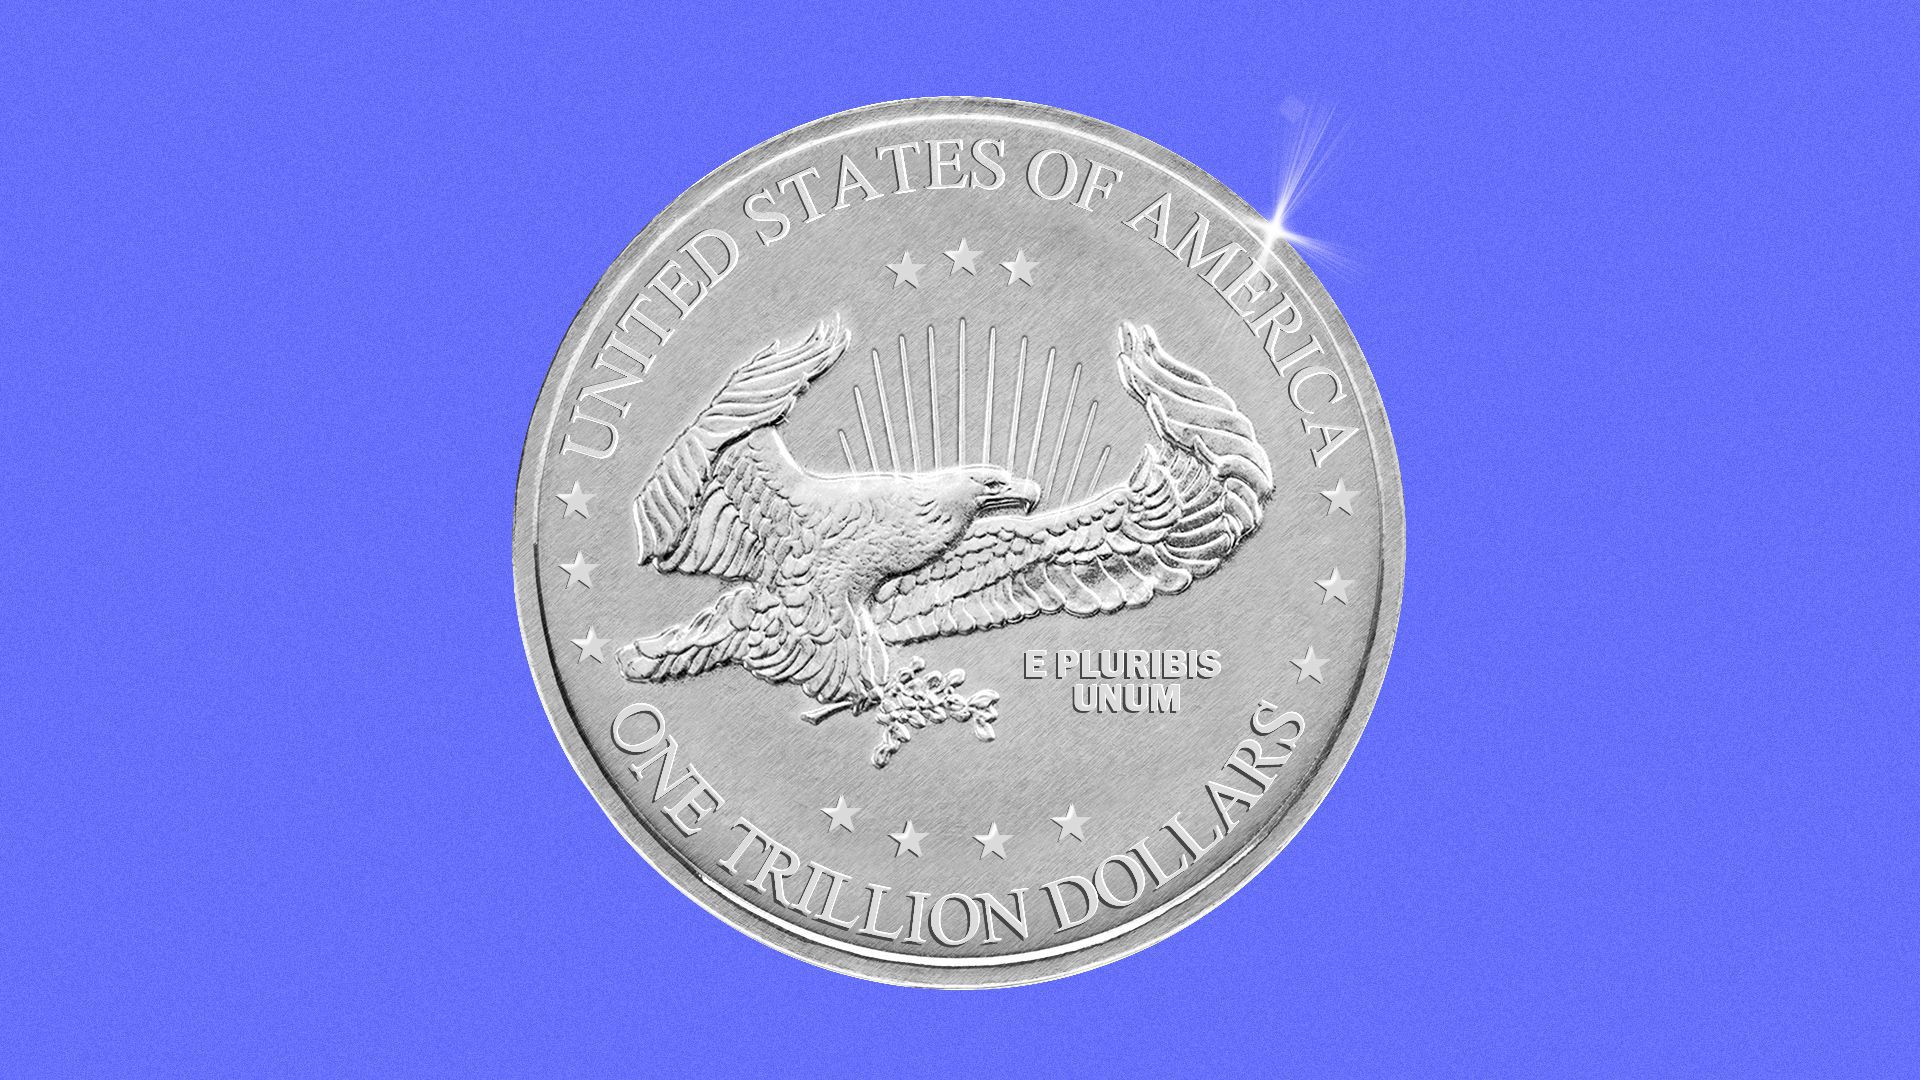 Trillion dollar platinum coin to avert debt ceiling issue? Heck print 100 of those puppies!